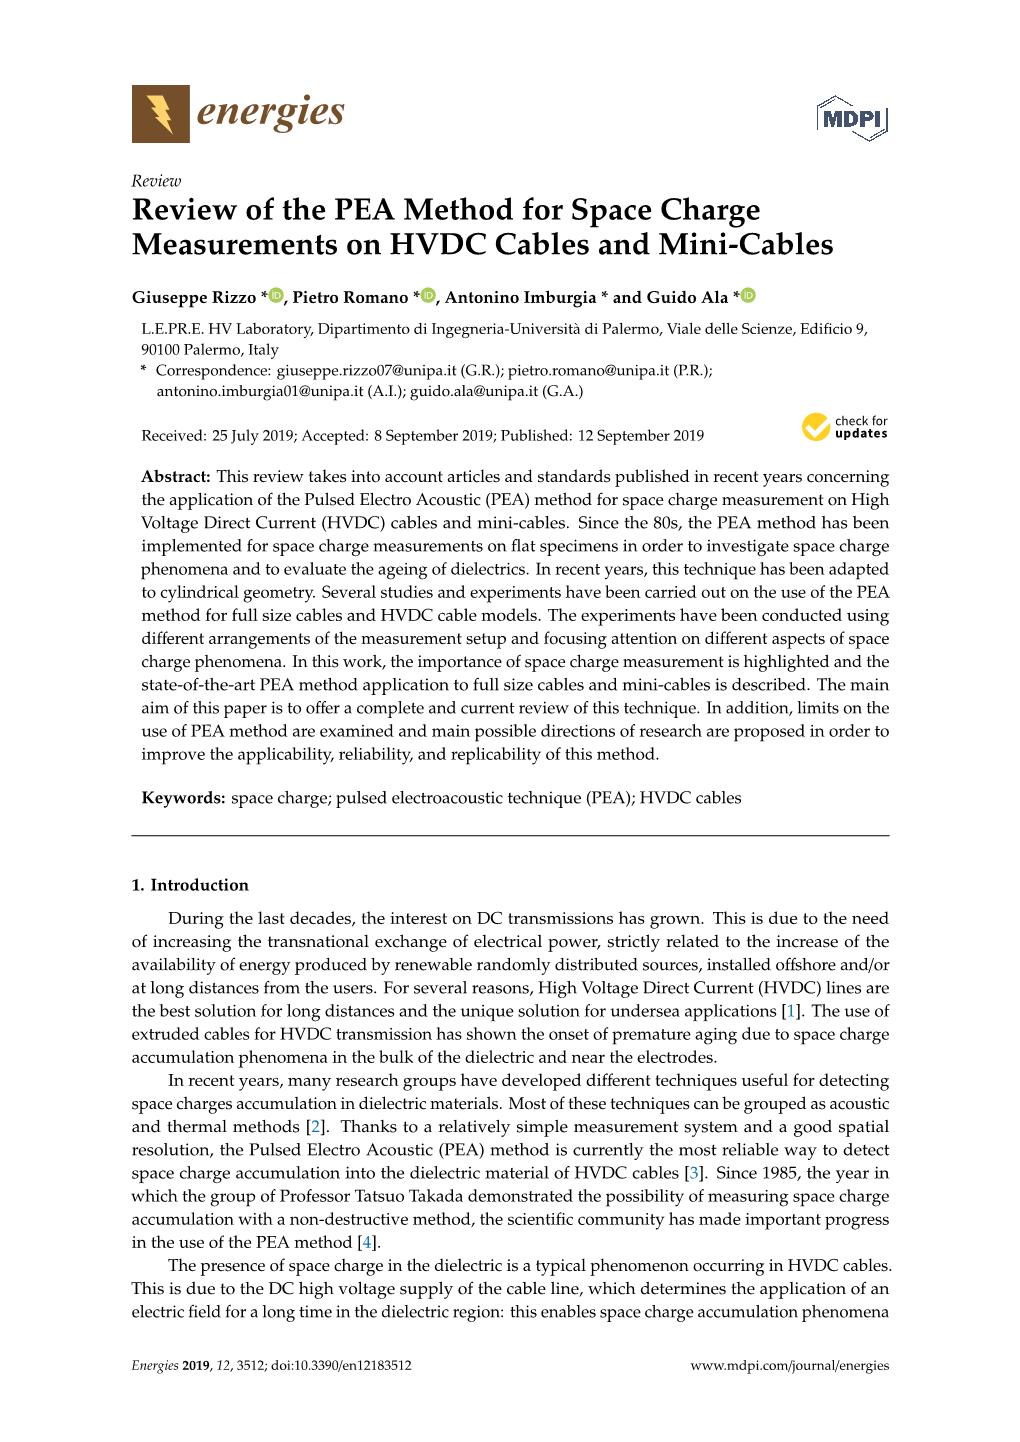 Review of the PEA Method for Space Charge Measurements on HVDC Cables and Mini-Cables